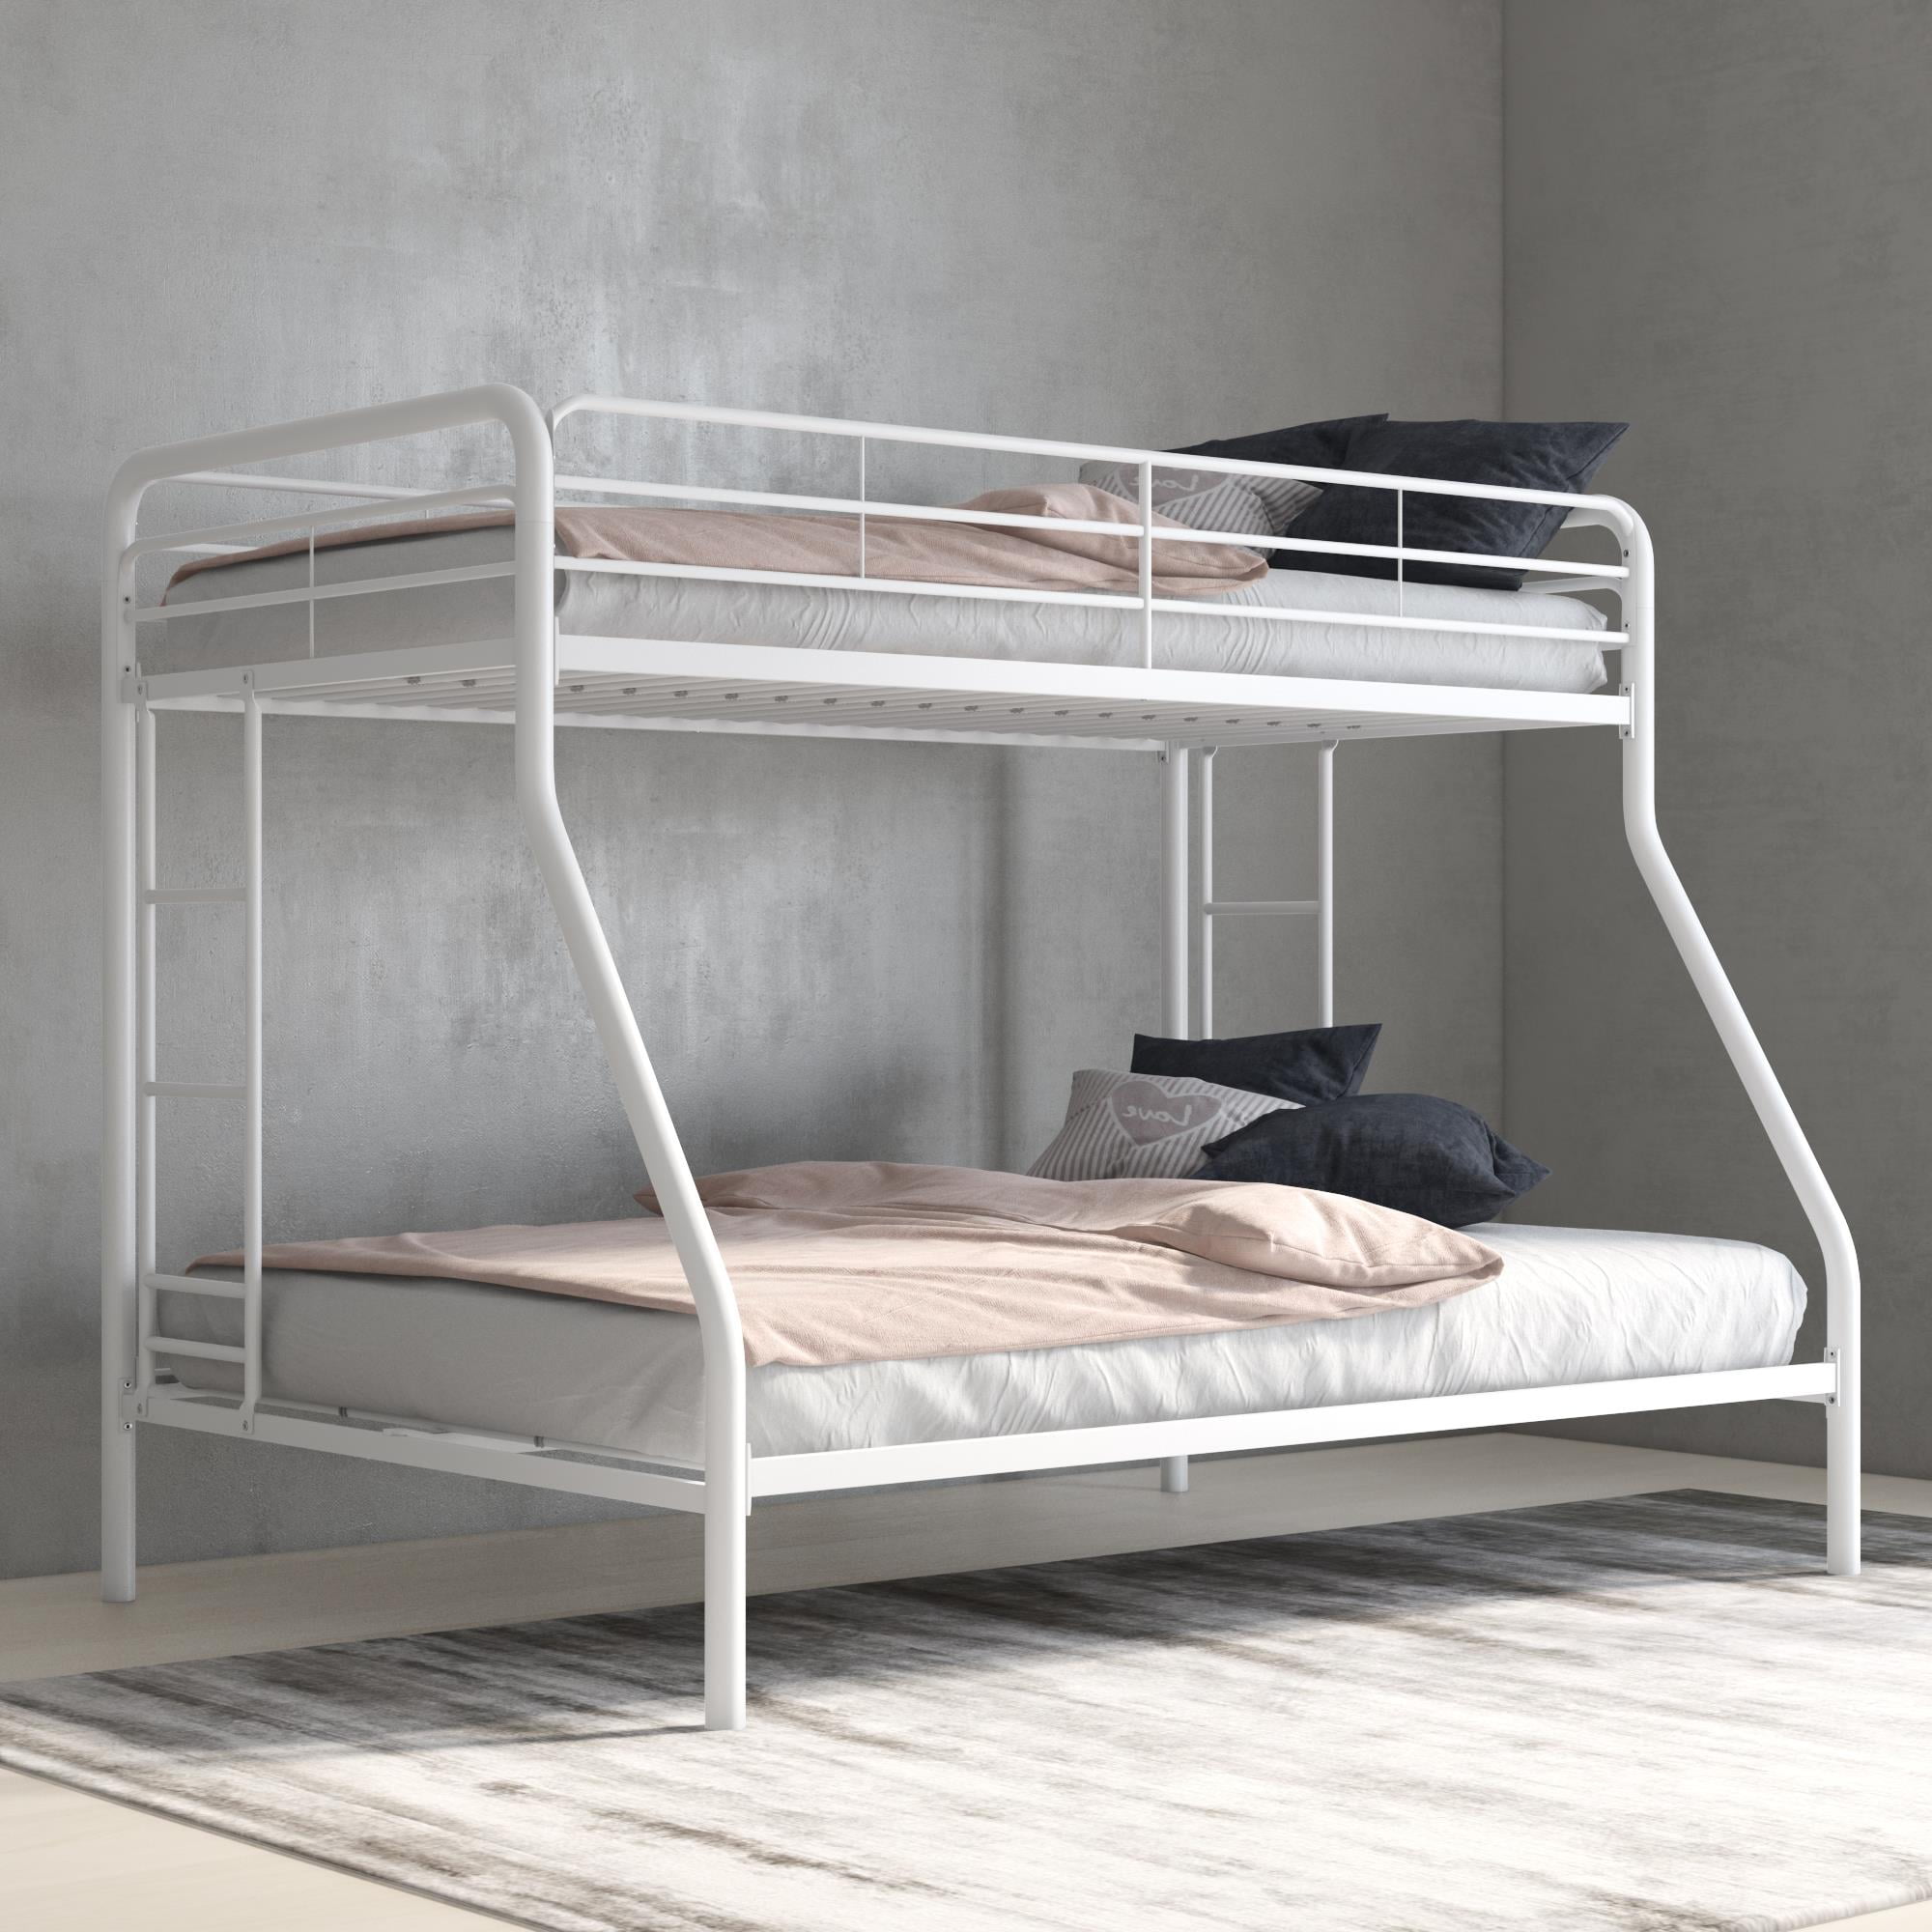 Dhp Twin Over Full Metal Bunk Bed Frame, Metal Frame Twin Bunk Beds